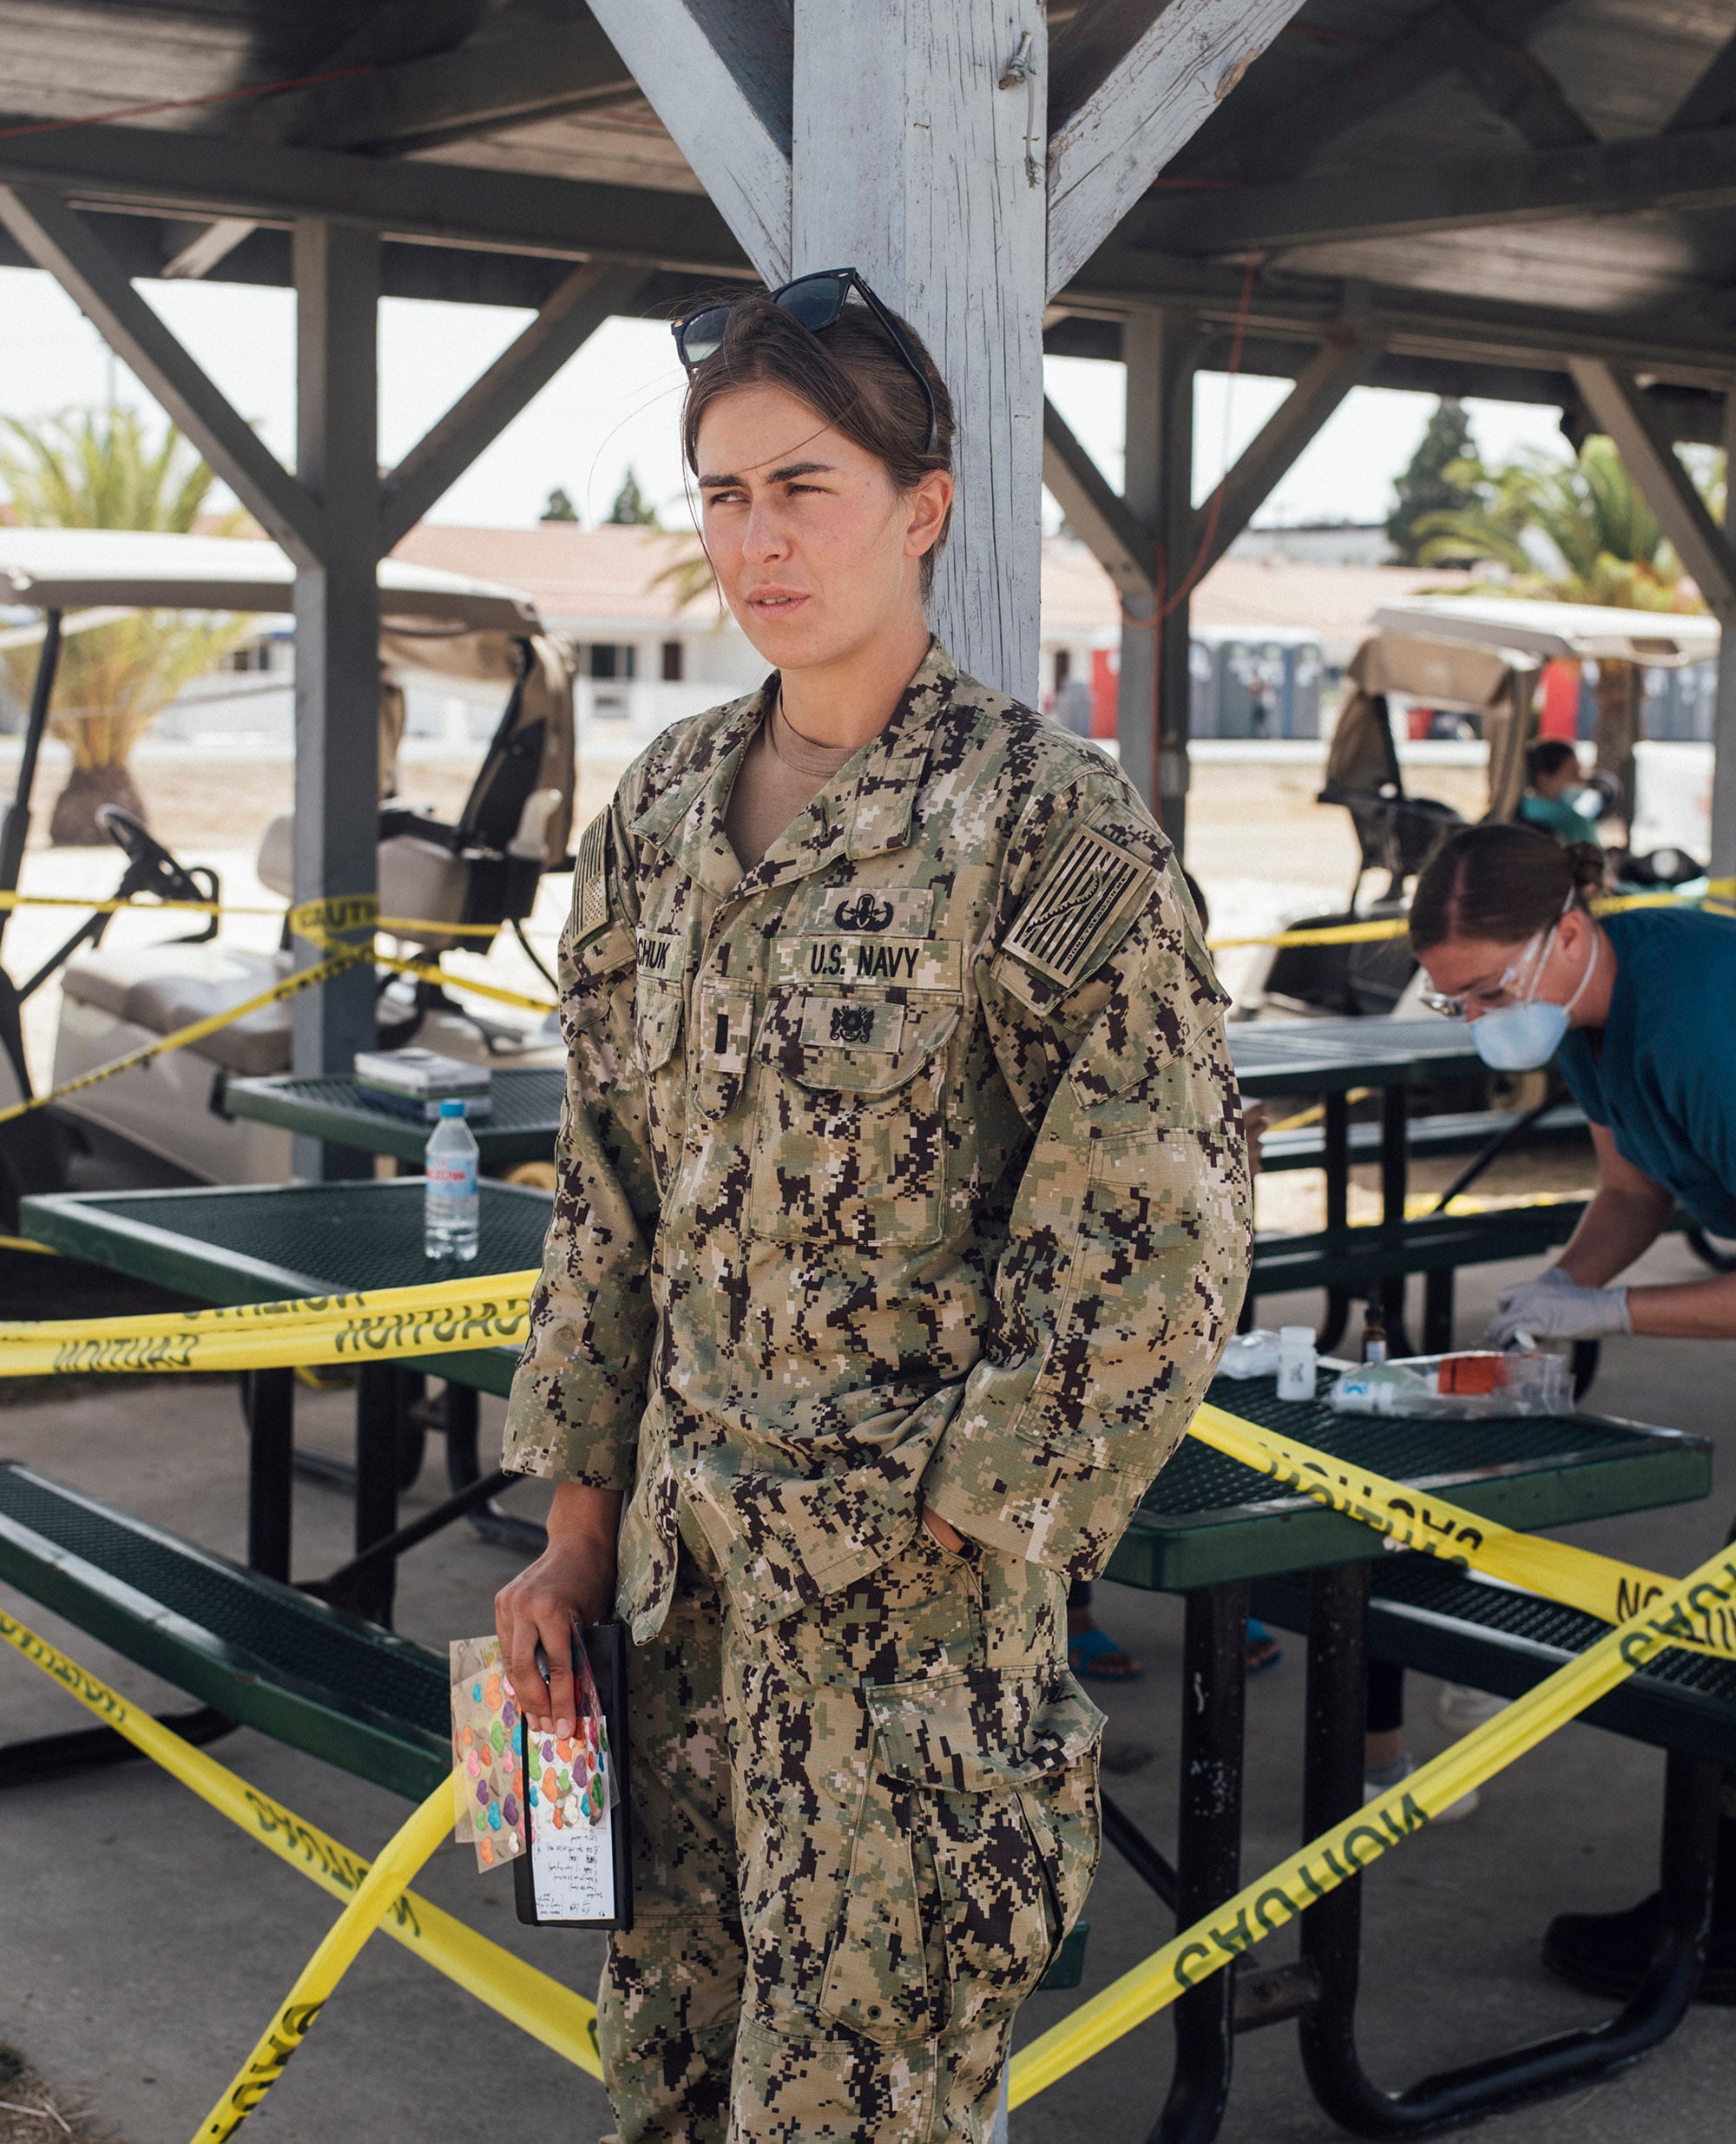 Lieutenant Grade Emily Oneschuk in the area for evacuees from Afghanistan.